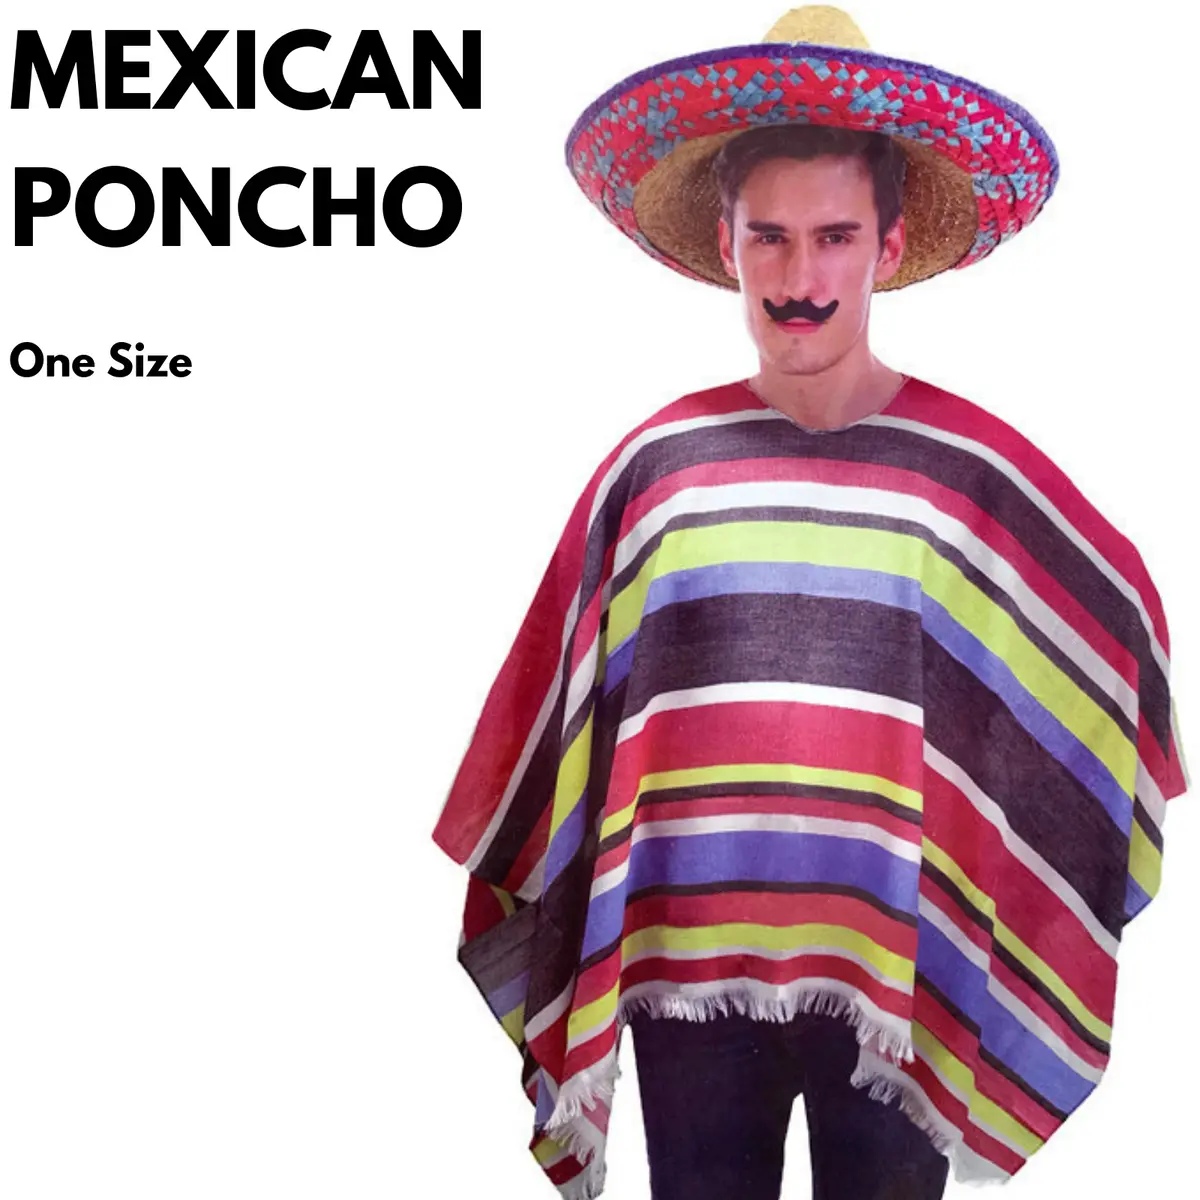 midtergang nægte Identificere Mens MEXICAN PONCHO Spanish Costume Wild West Cowboy Party Bandit Fiesta  6130000124650 | eBay